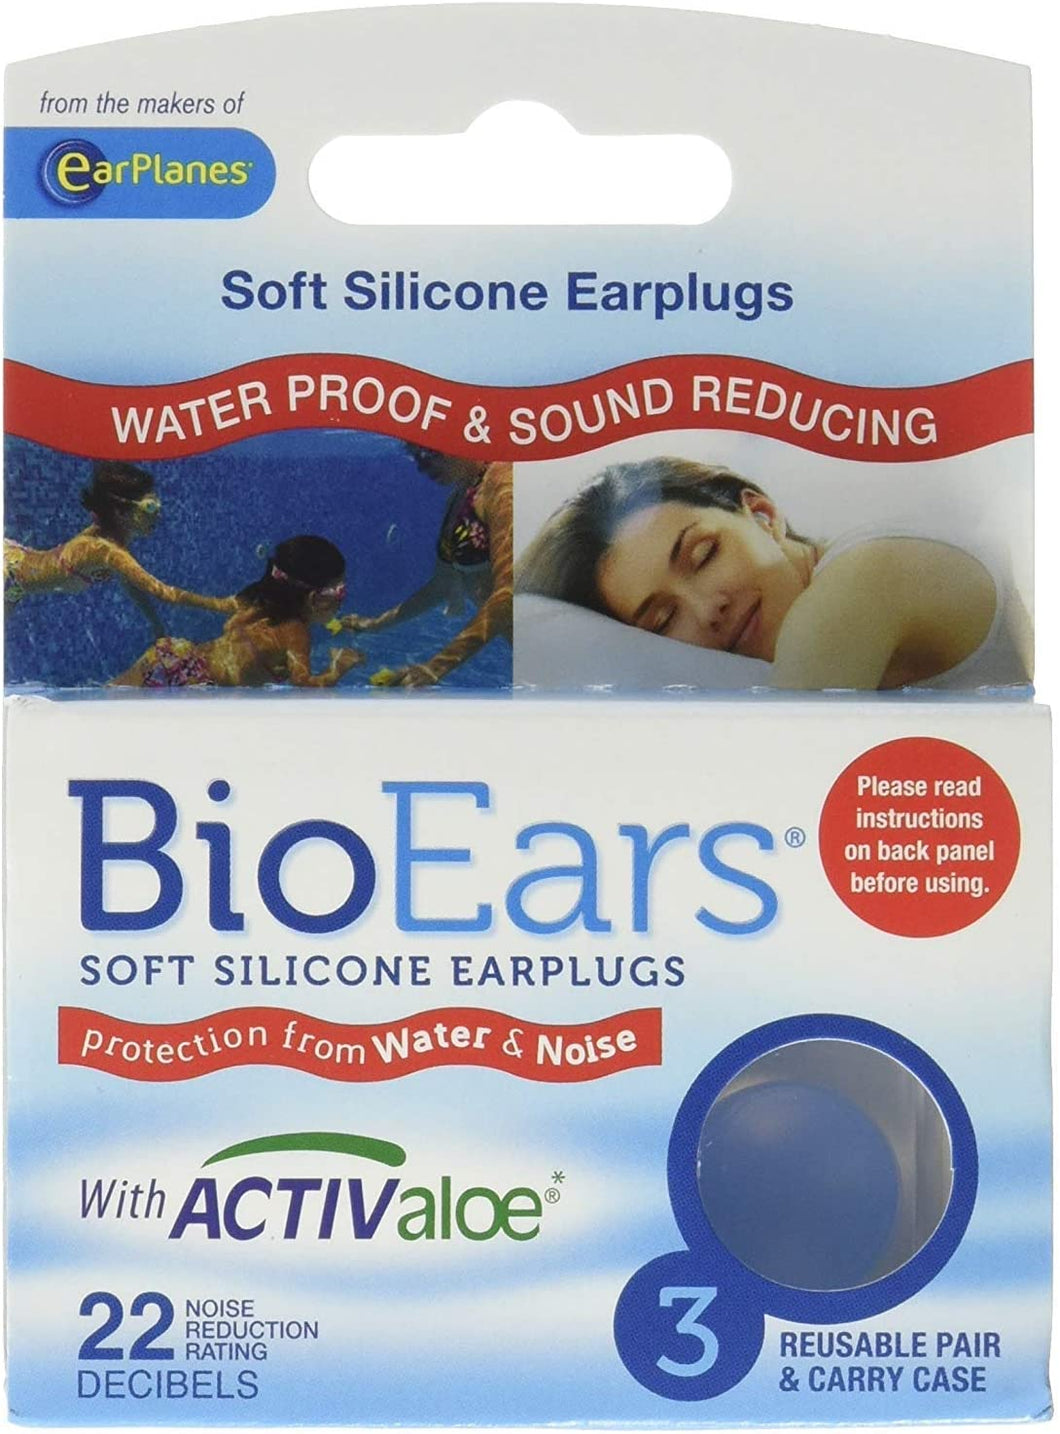 Bio Ears Soft Silicone Earplugs Water & Noise Protection with Activ Aloe